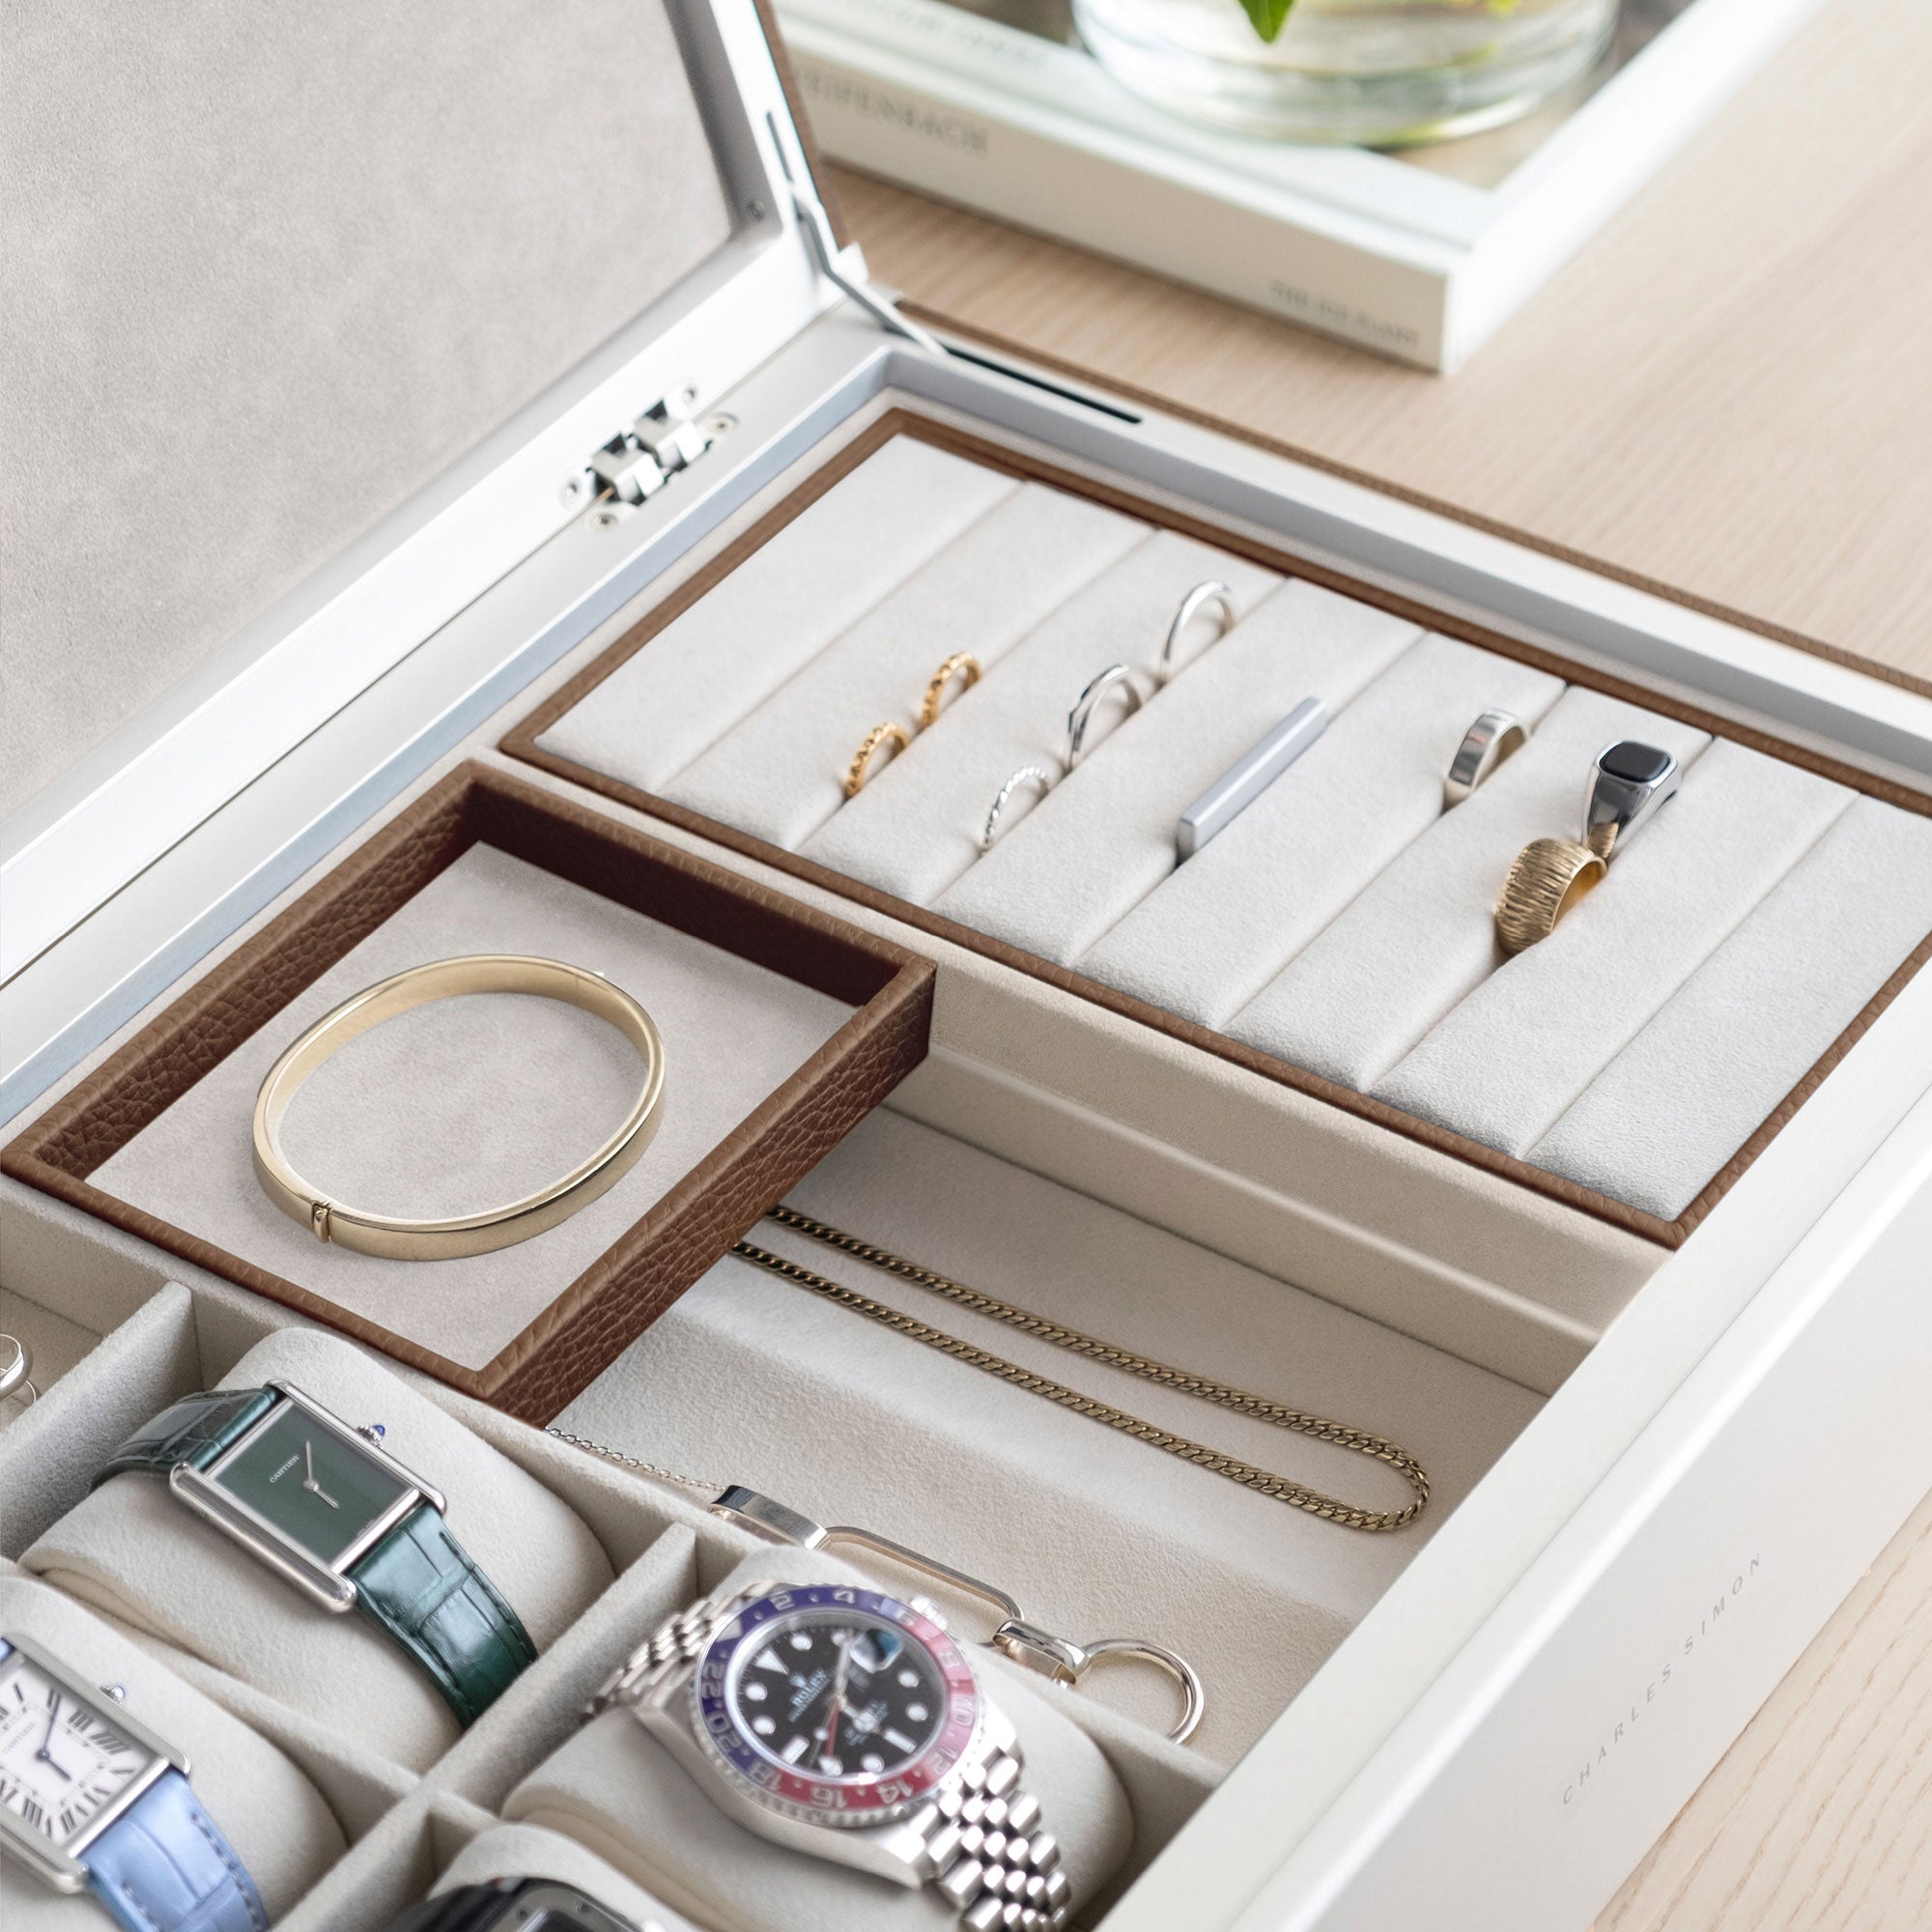 Detail photo of jewelry storage compartments and watch cushions of the Taylor 4 Watch and Jewelry box in tan leather and eggshell interior. 